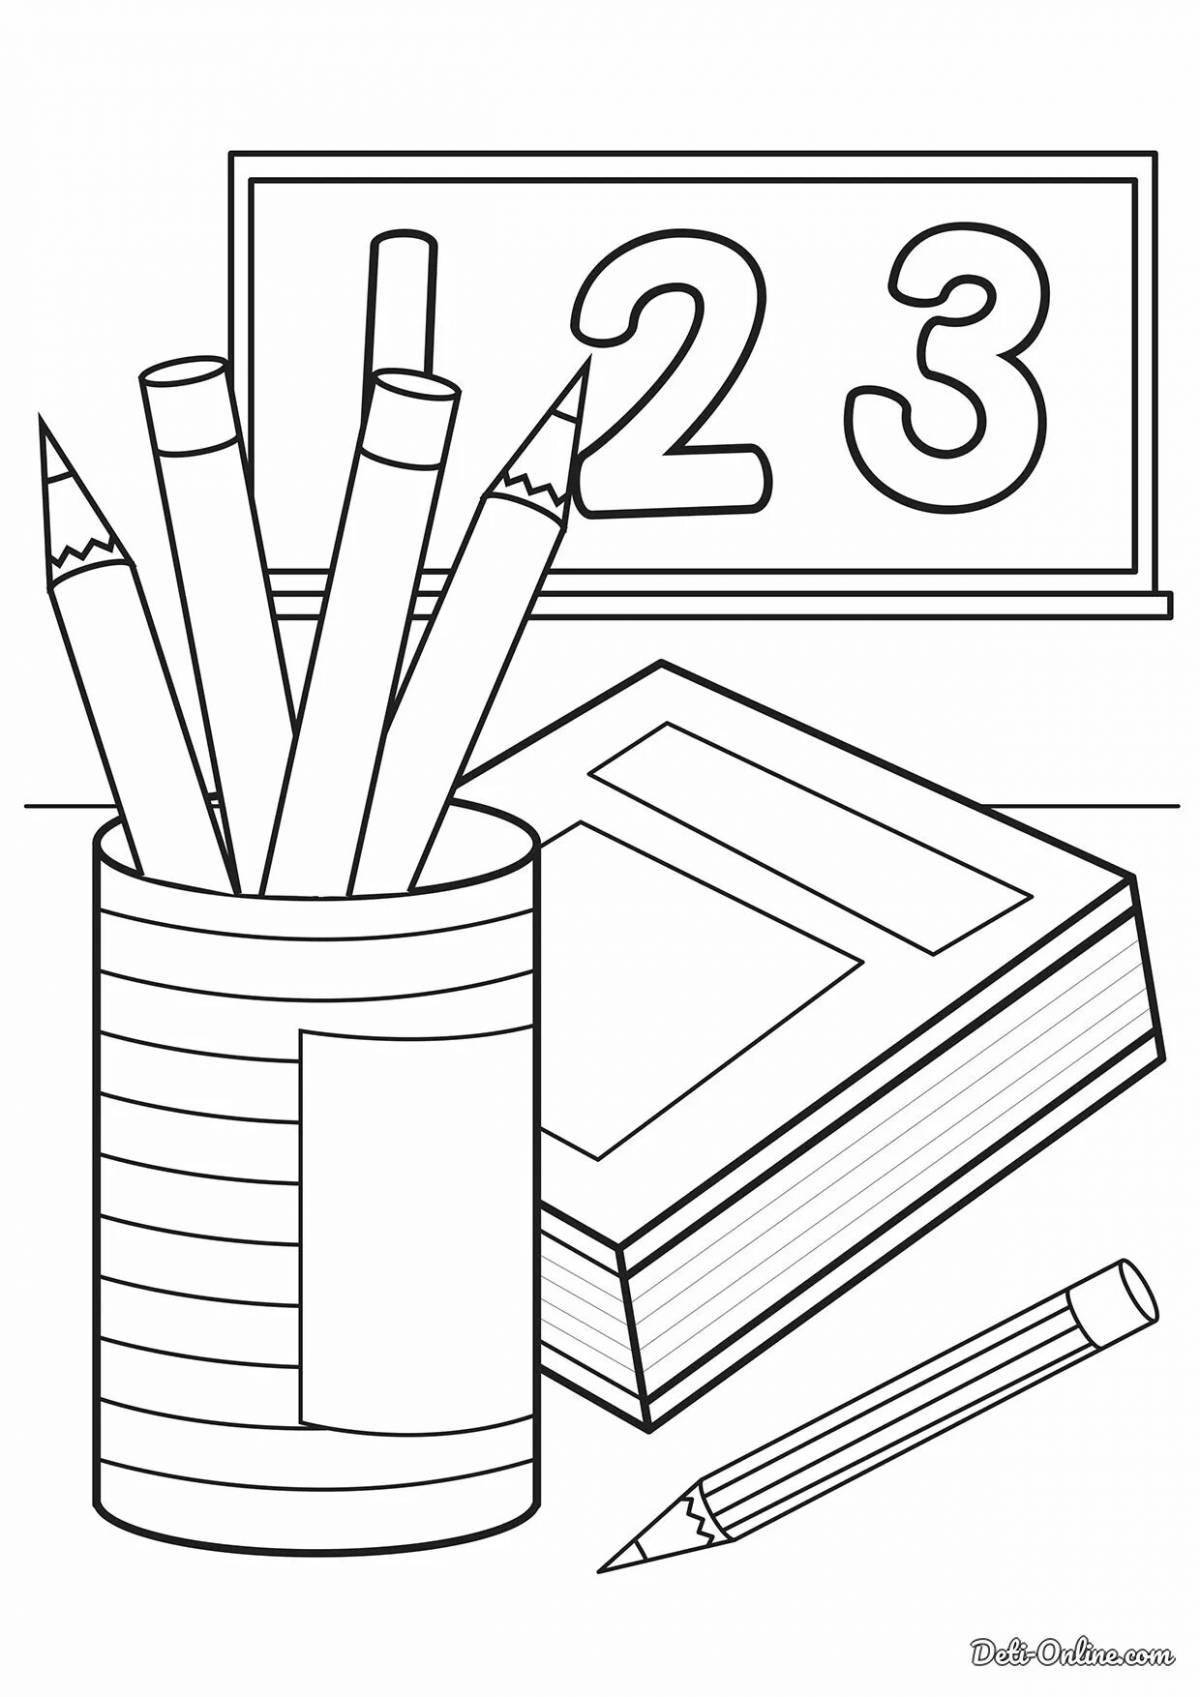 Rux coloring page glitter pencils